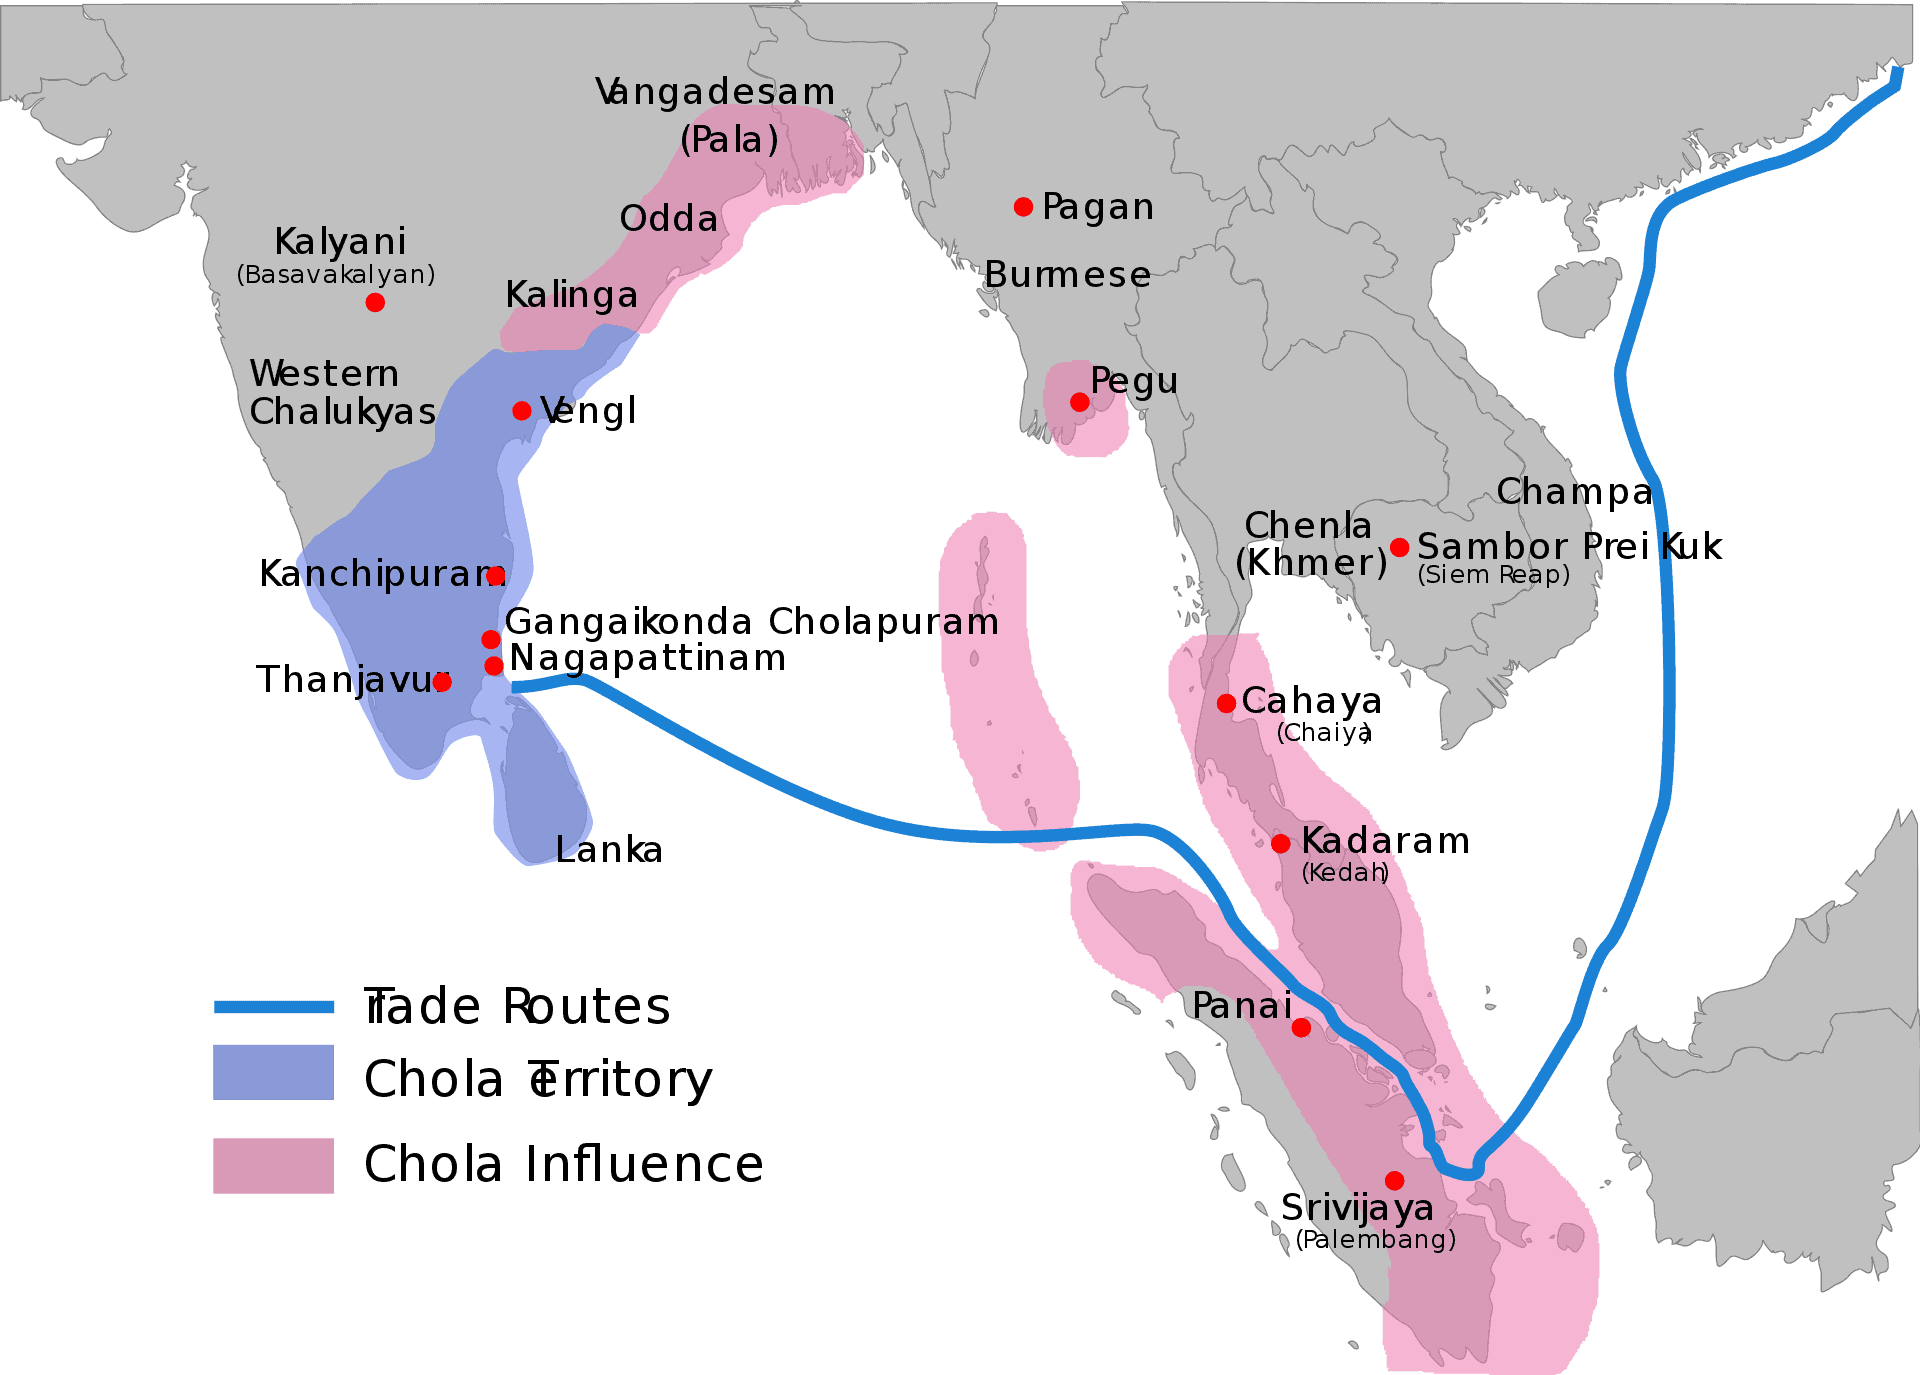 Map showing the greatest extent of the Chola empire c. 1030, shaded in blue represent conquered territories, shaded in pink shows areas influenced by Chola.